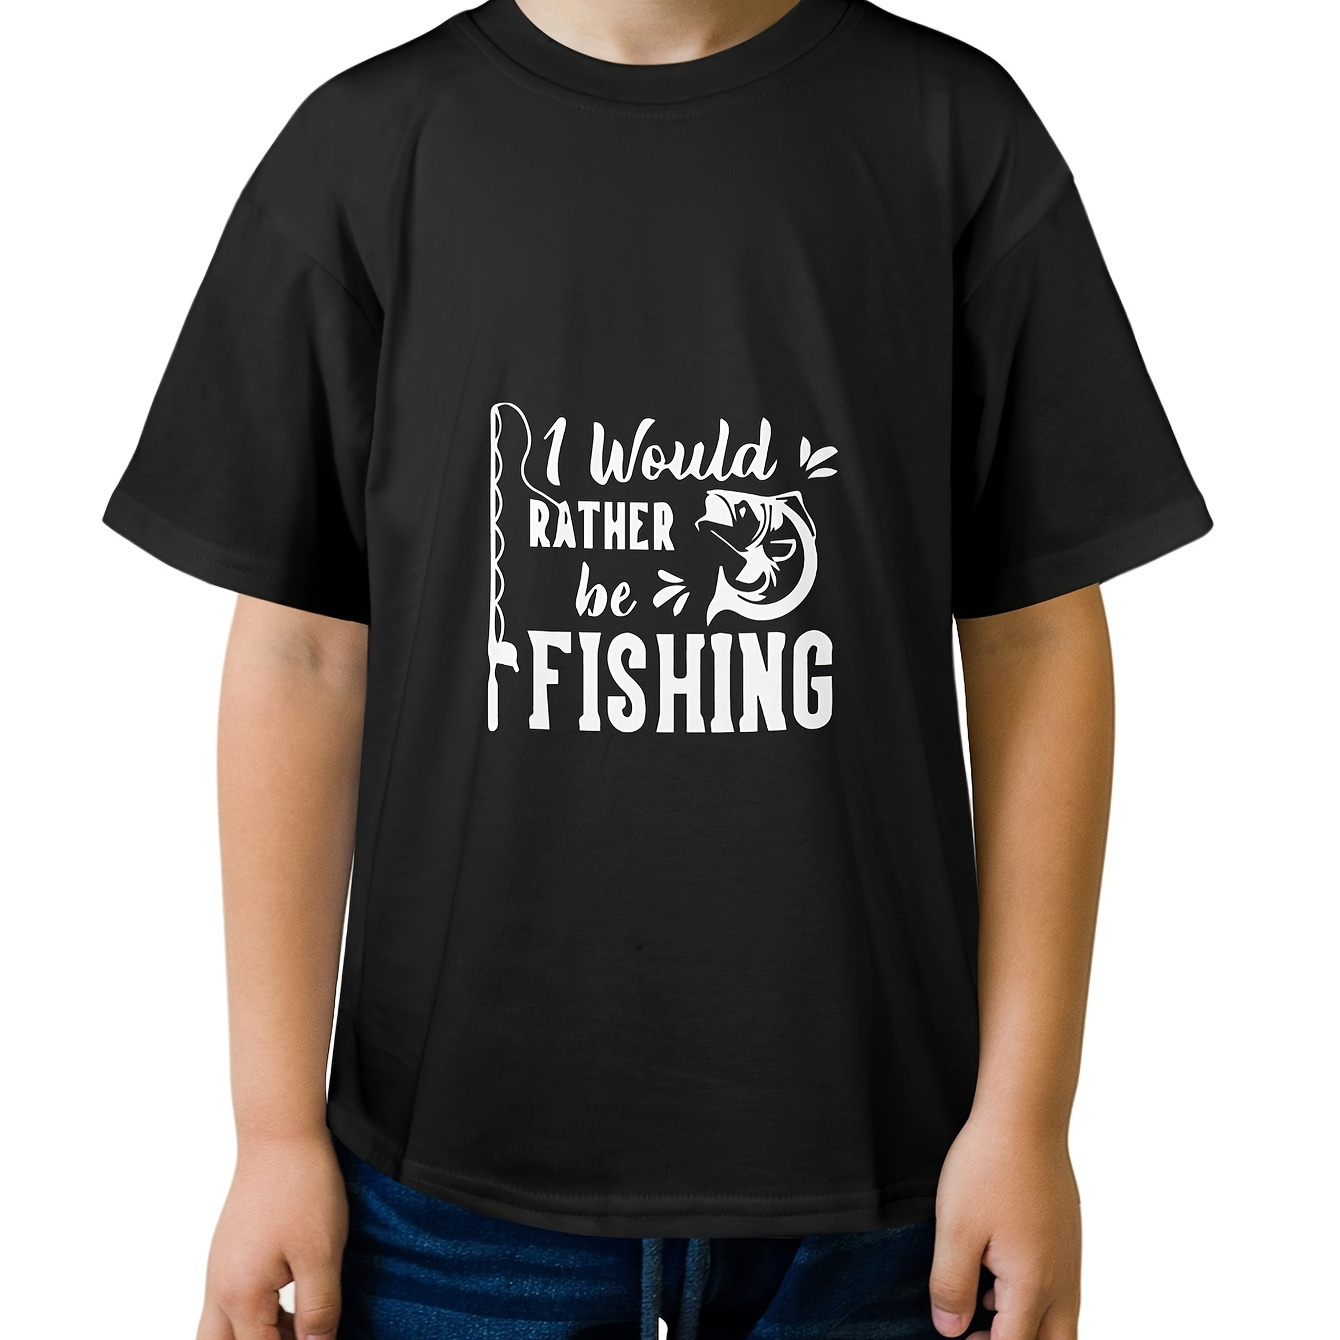 

'i Would Rather Be Fishing' - Boys Short Sleeve T-shirts - Comfortable & Stylish Casual Tops For Summer, Spring & Fall - Ideal Gift For Little Fashionistas